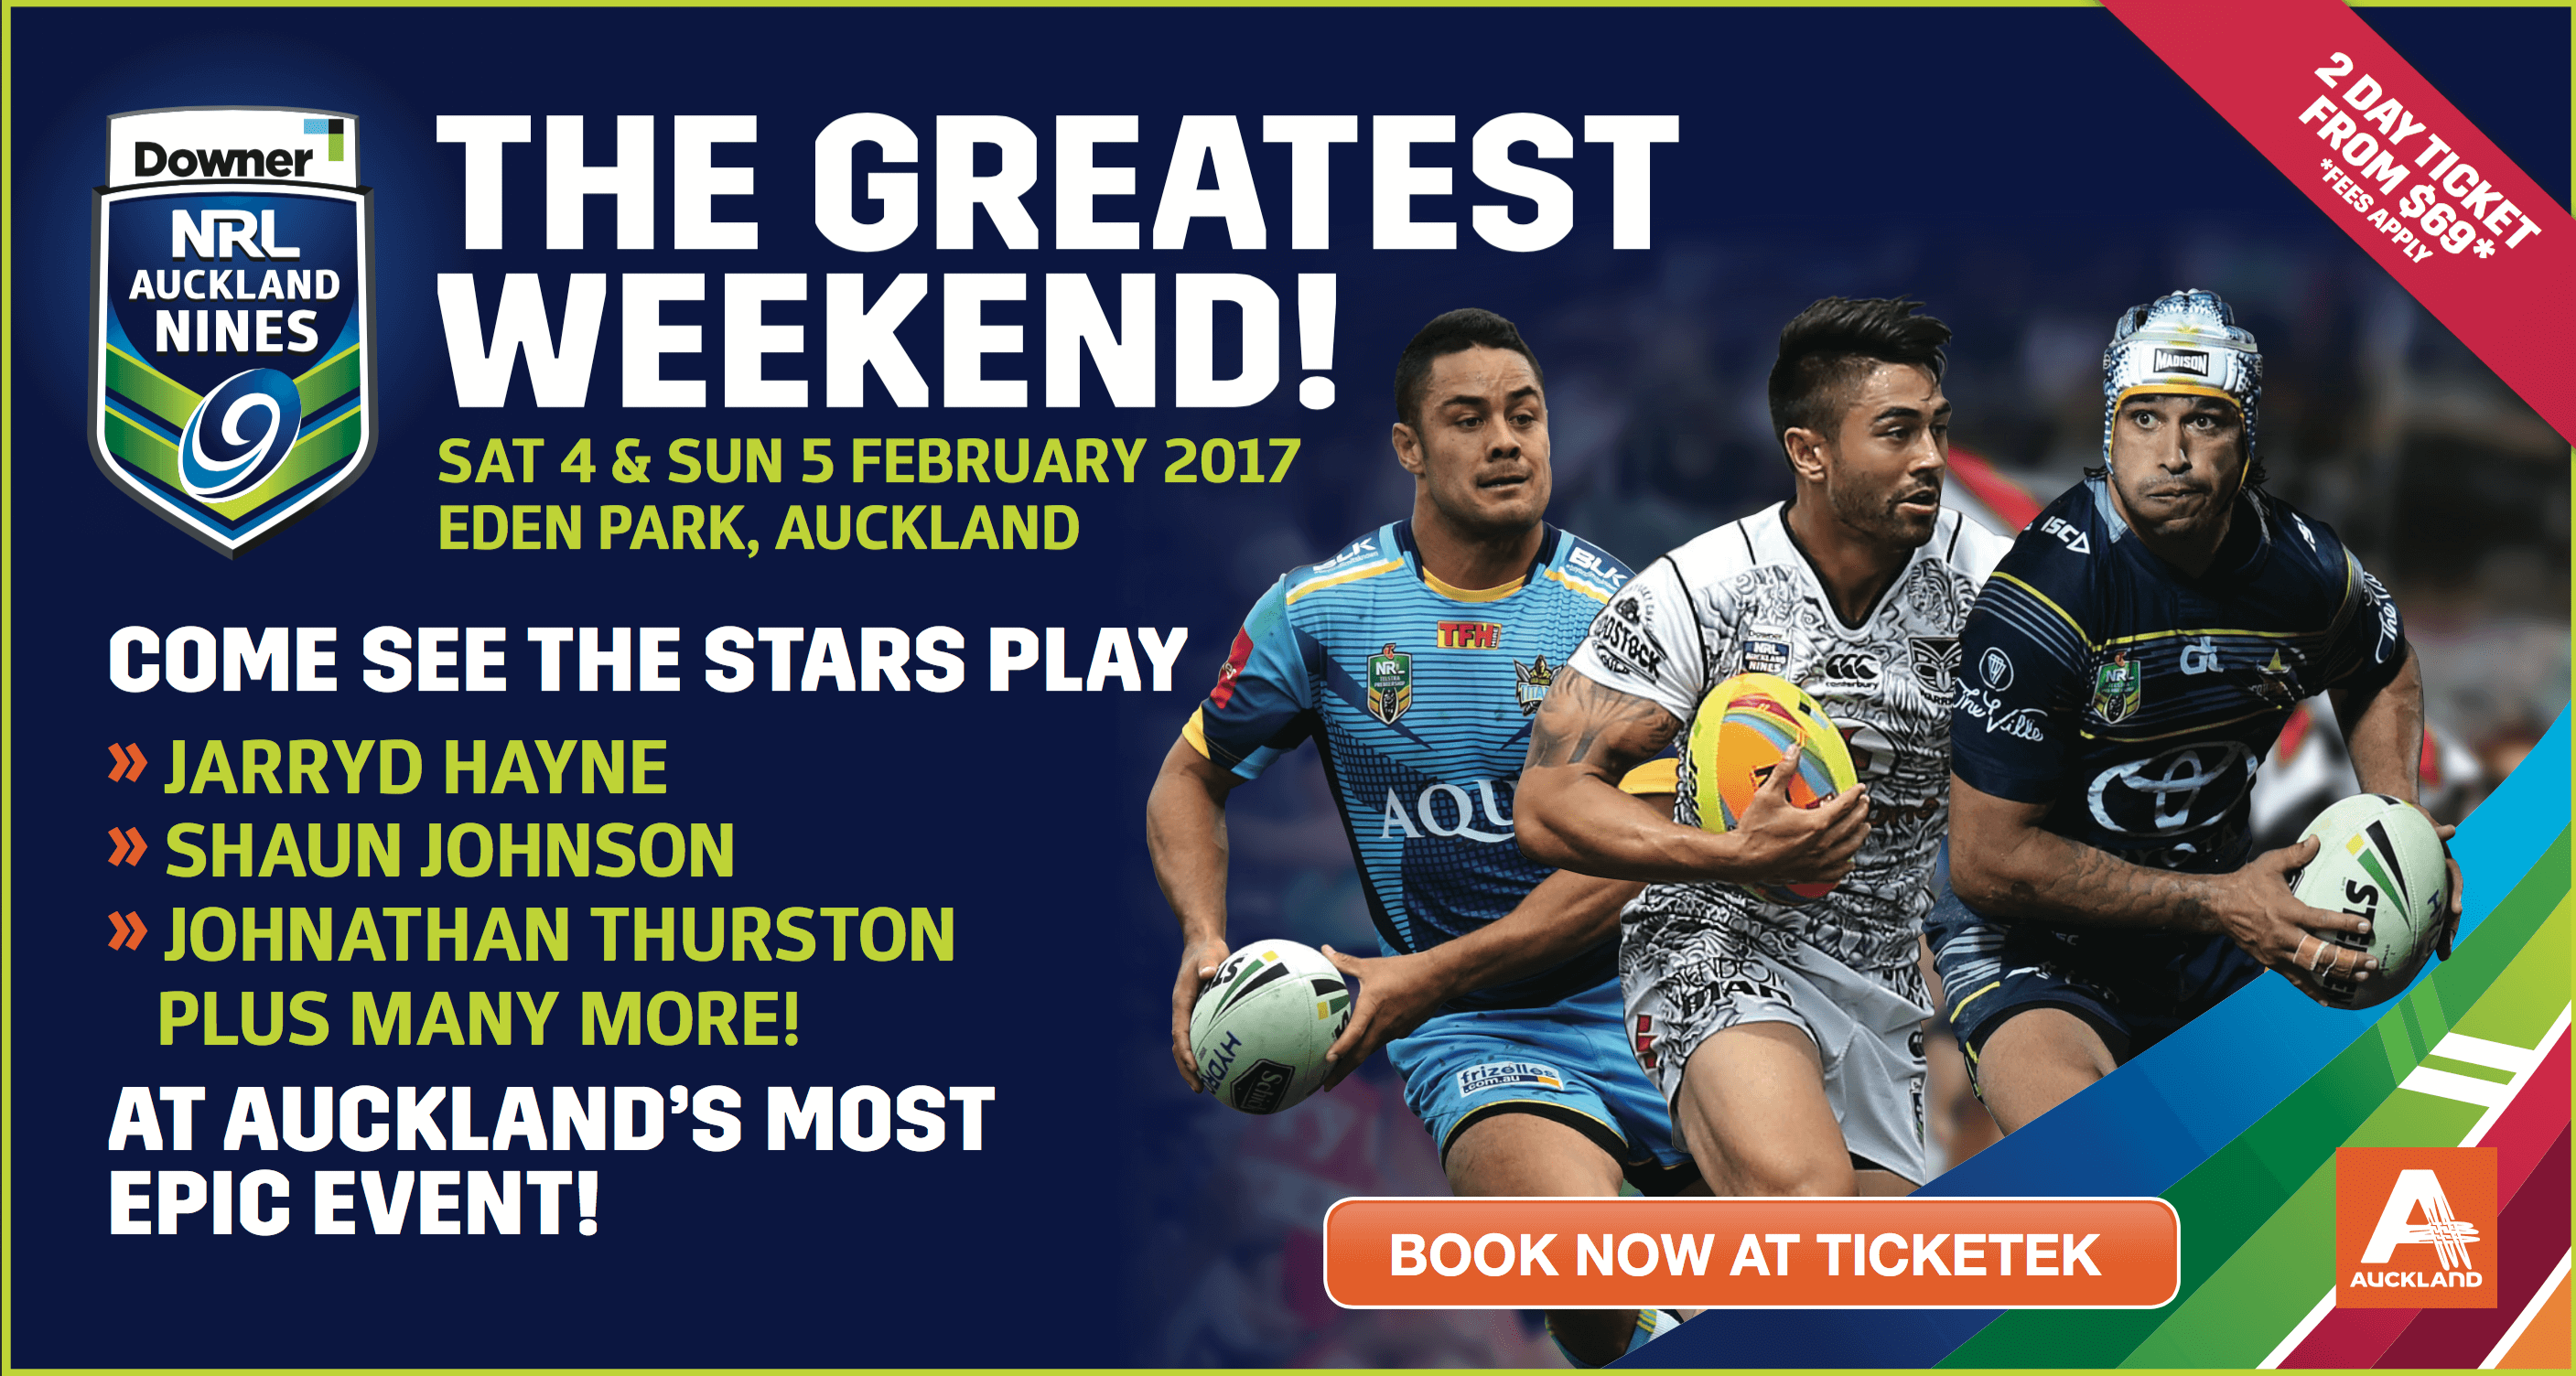 Last chance for Downer NRL Auckland Nines tickets